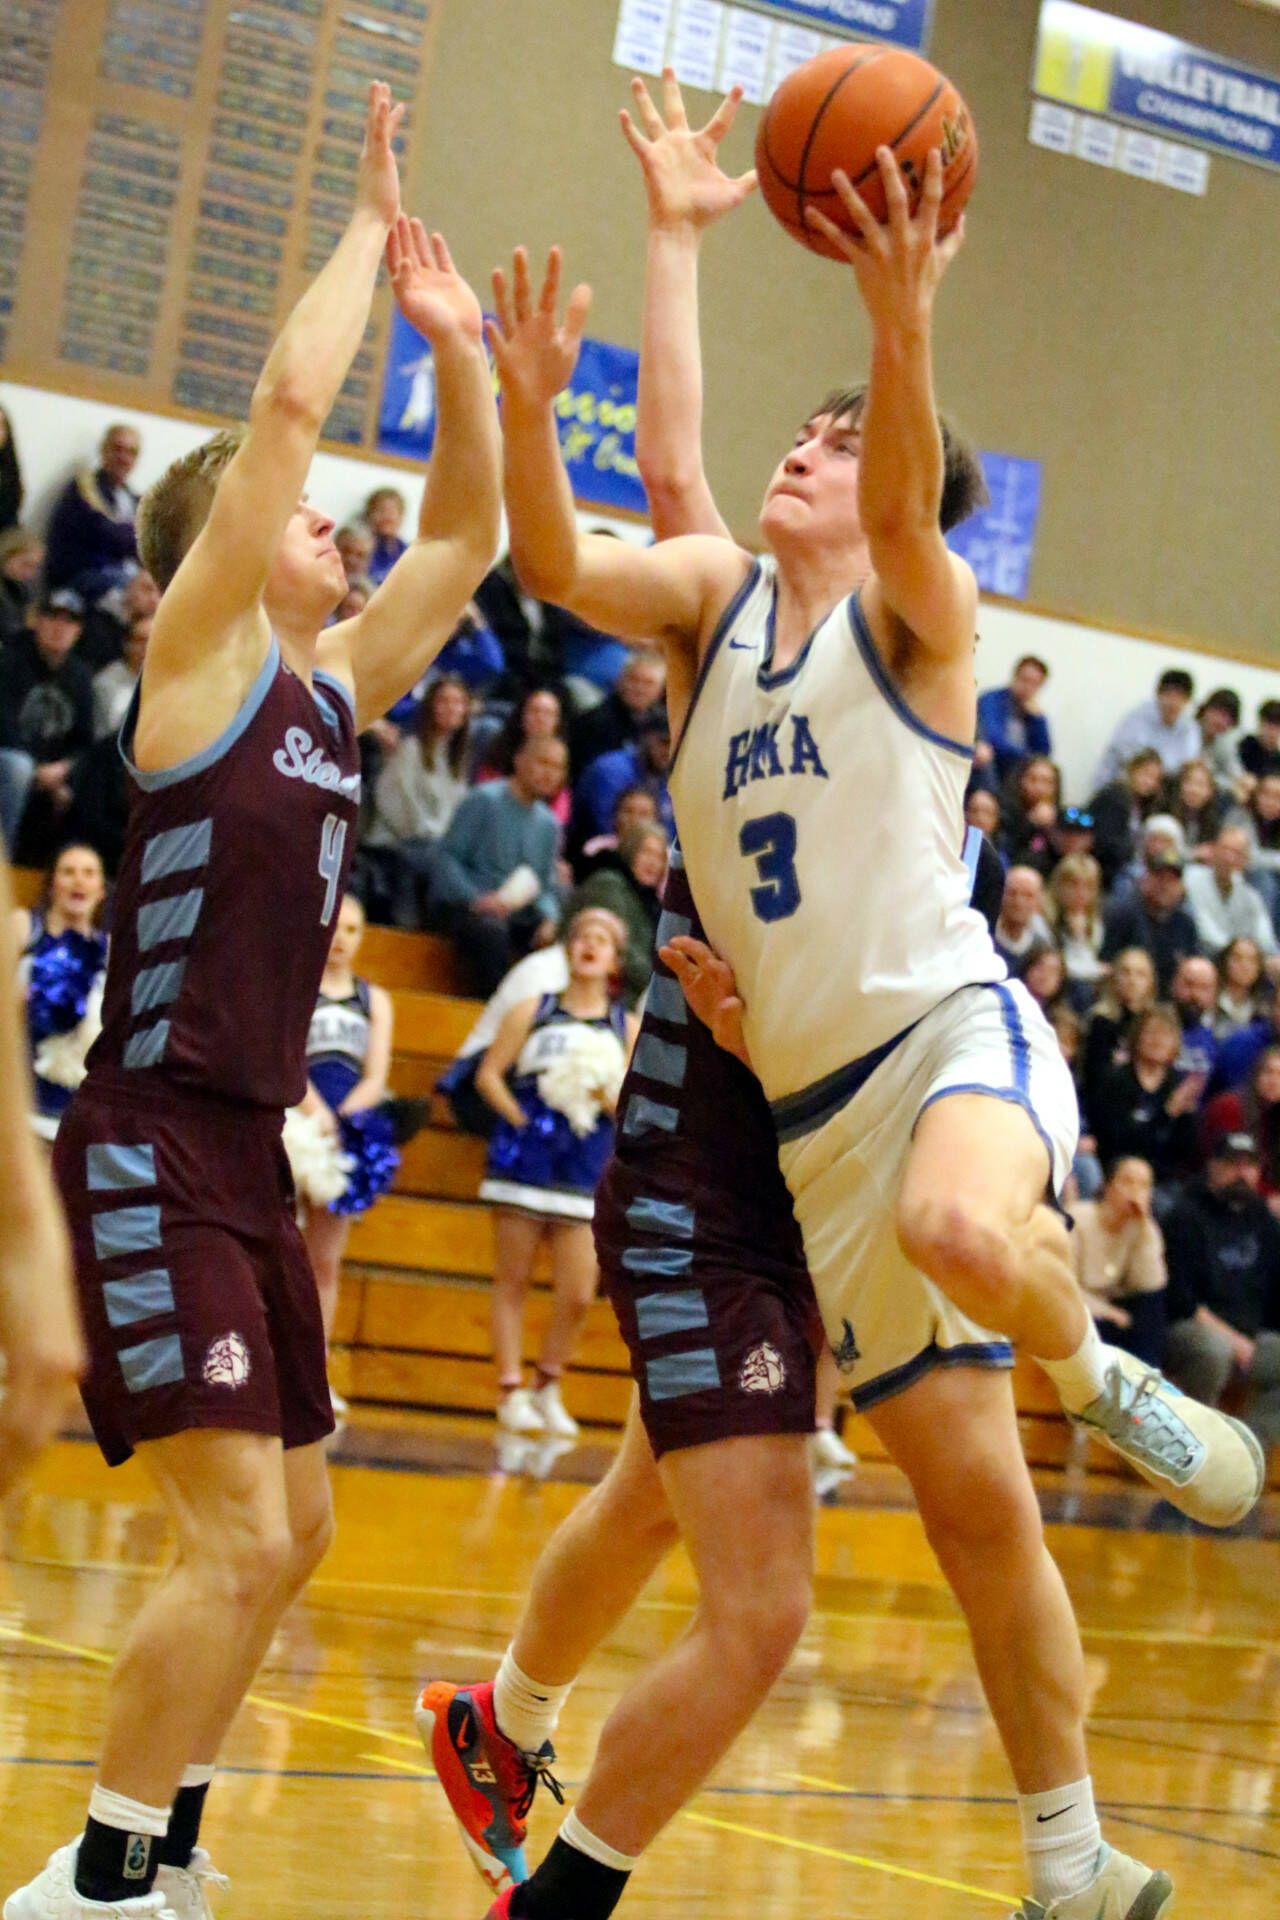 RYAN SPARKS | THE DAILY WORLD Elma’s AJ Holmes (3) goes up for a shot during a 43-41 win over Stevenson in a 1A District 4 Tournament elimination game on Wednesday at Rochester High School.